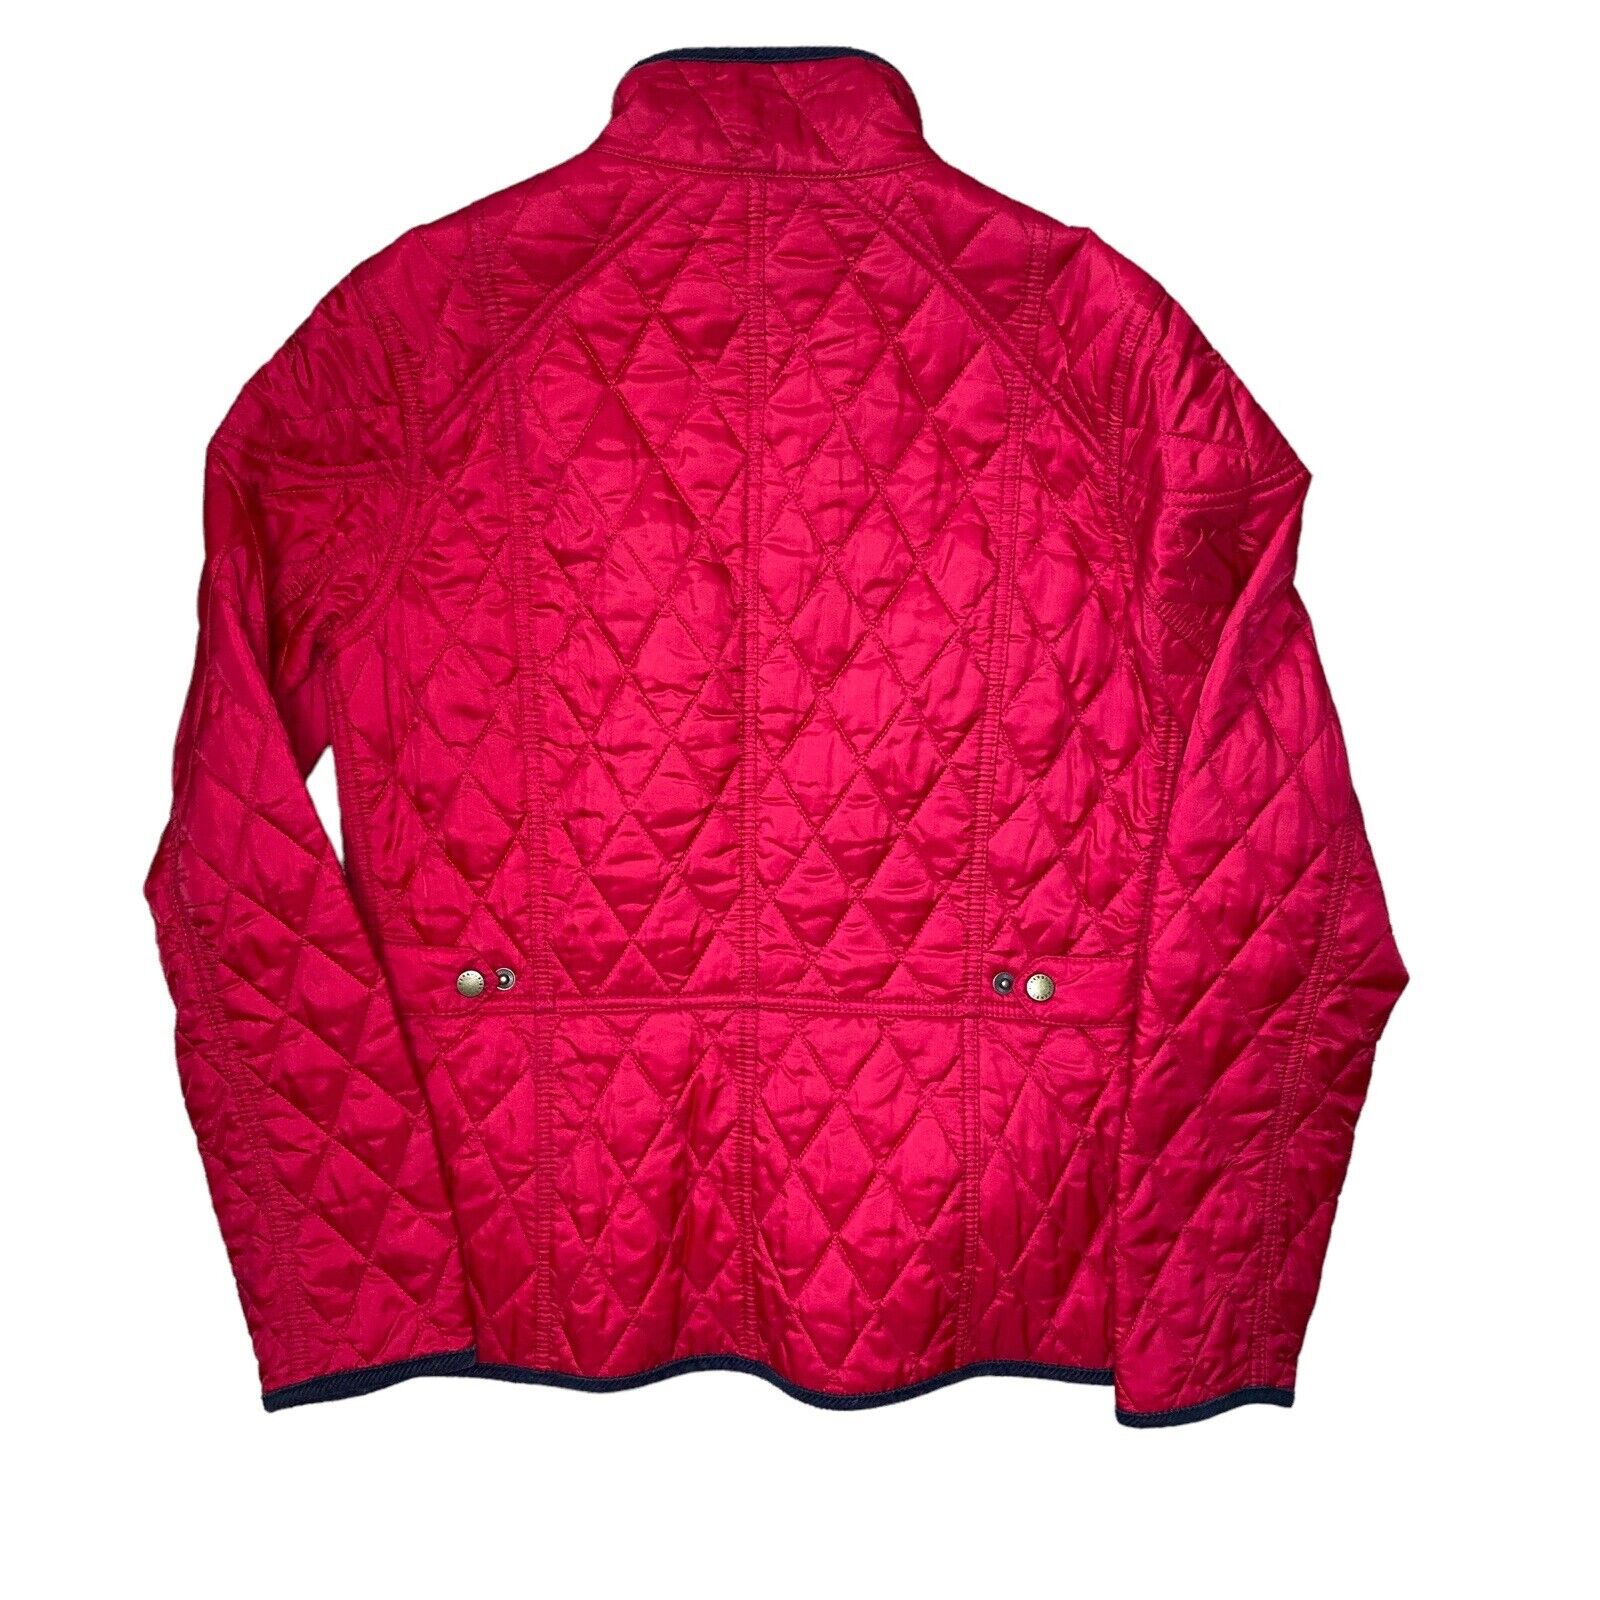 Barbour Women Jacket Quilted international Size 12 Red | eBay